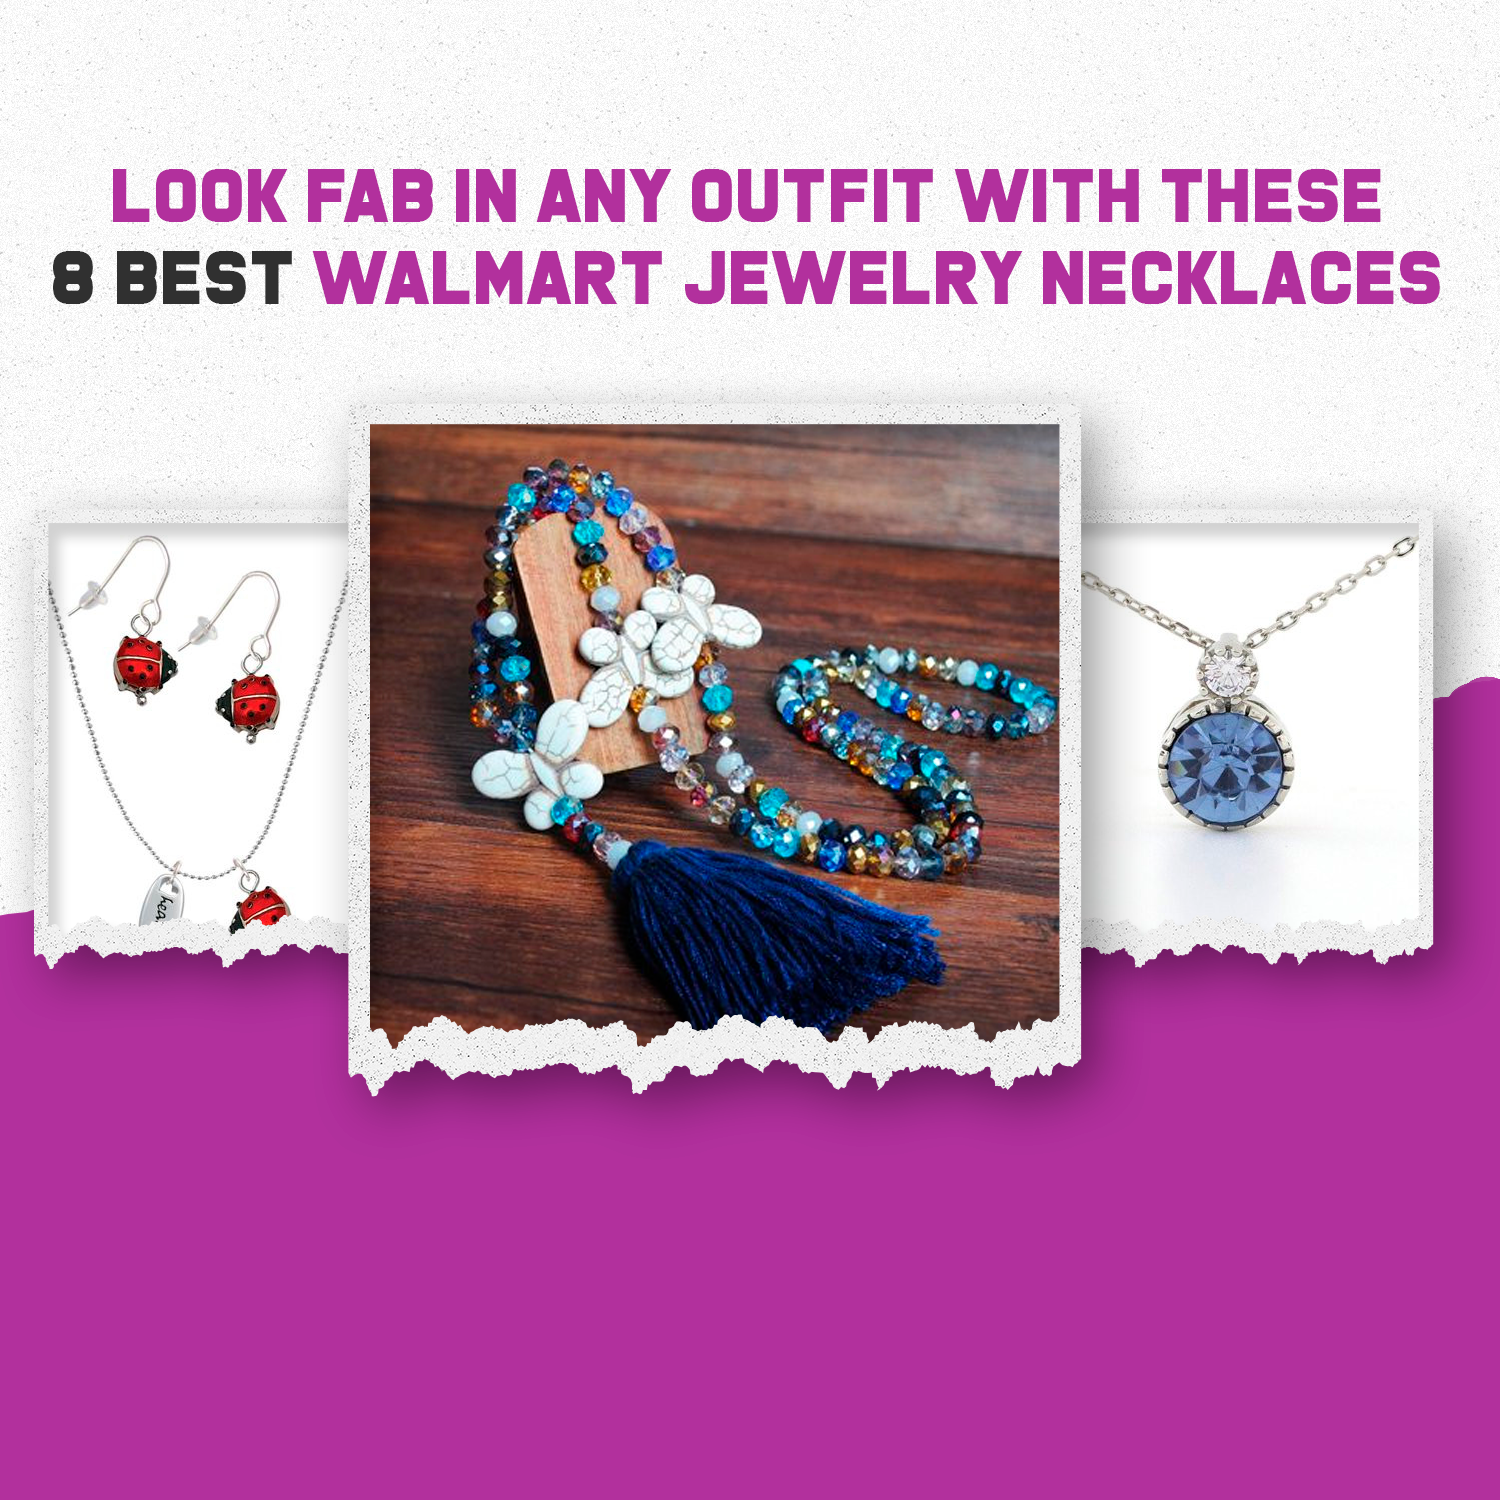 Look Fab in Any Outfit With These 8 Best Walmart Jewelry Necklaces